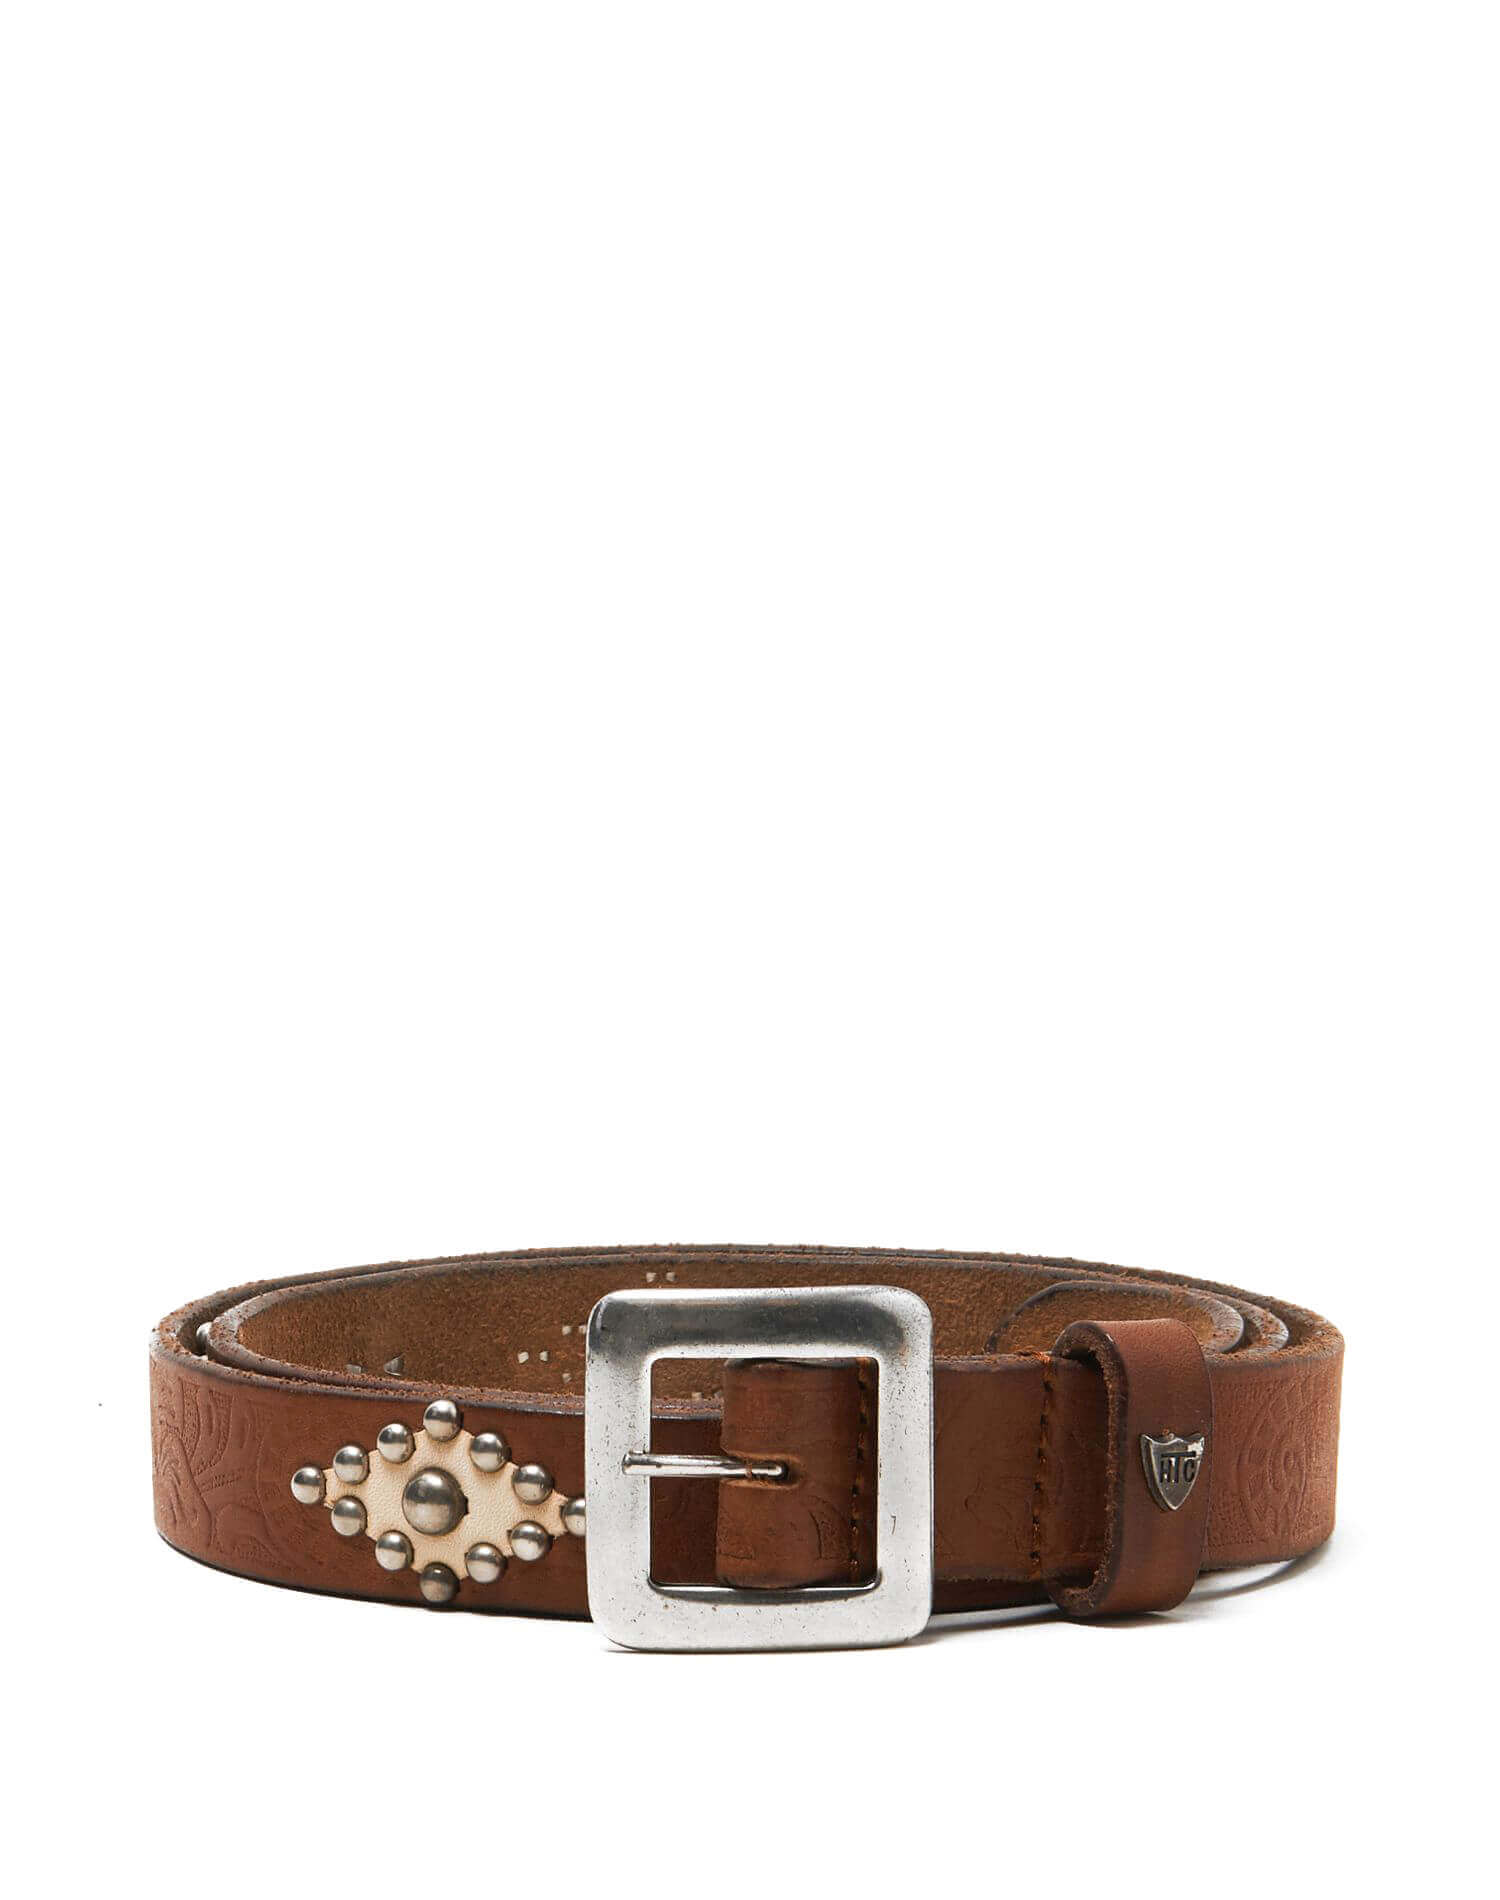 ROUGH ROCK BELT Cognac leather belt, rhombus leather details with glass stones, 3 cm height. Made in Italy HTC LOS ANGELES